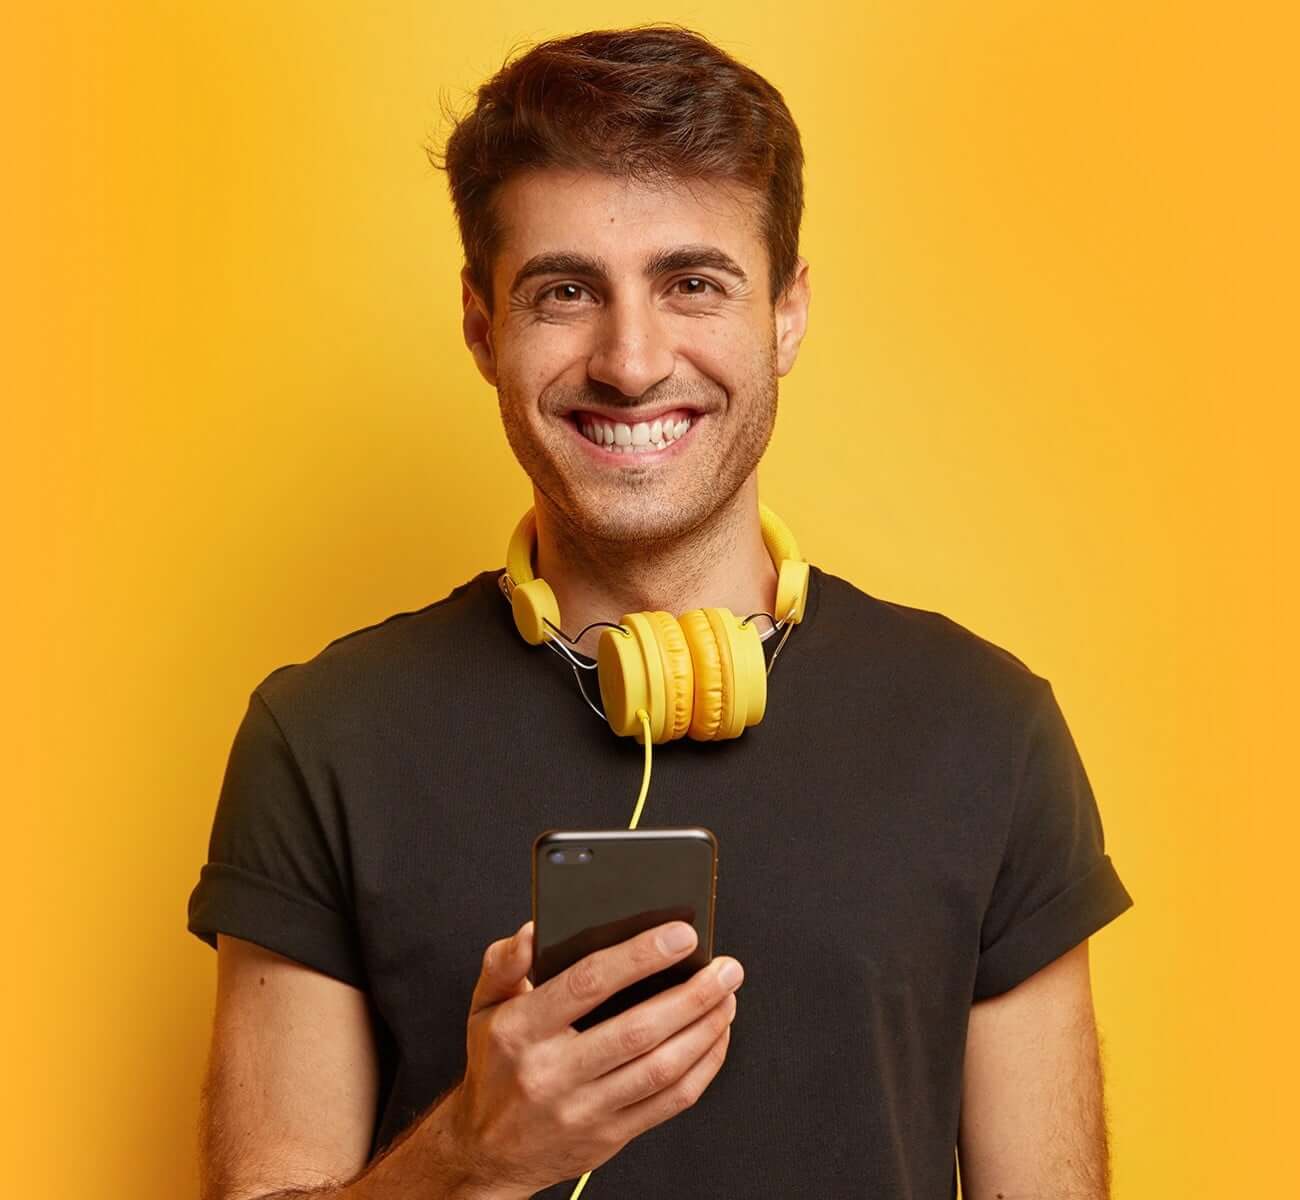 Smiling young man holding a phone and wearing orange head phones, all on an orange background » HCi